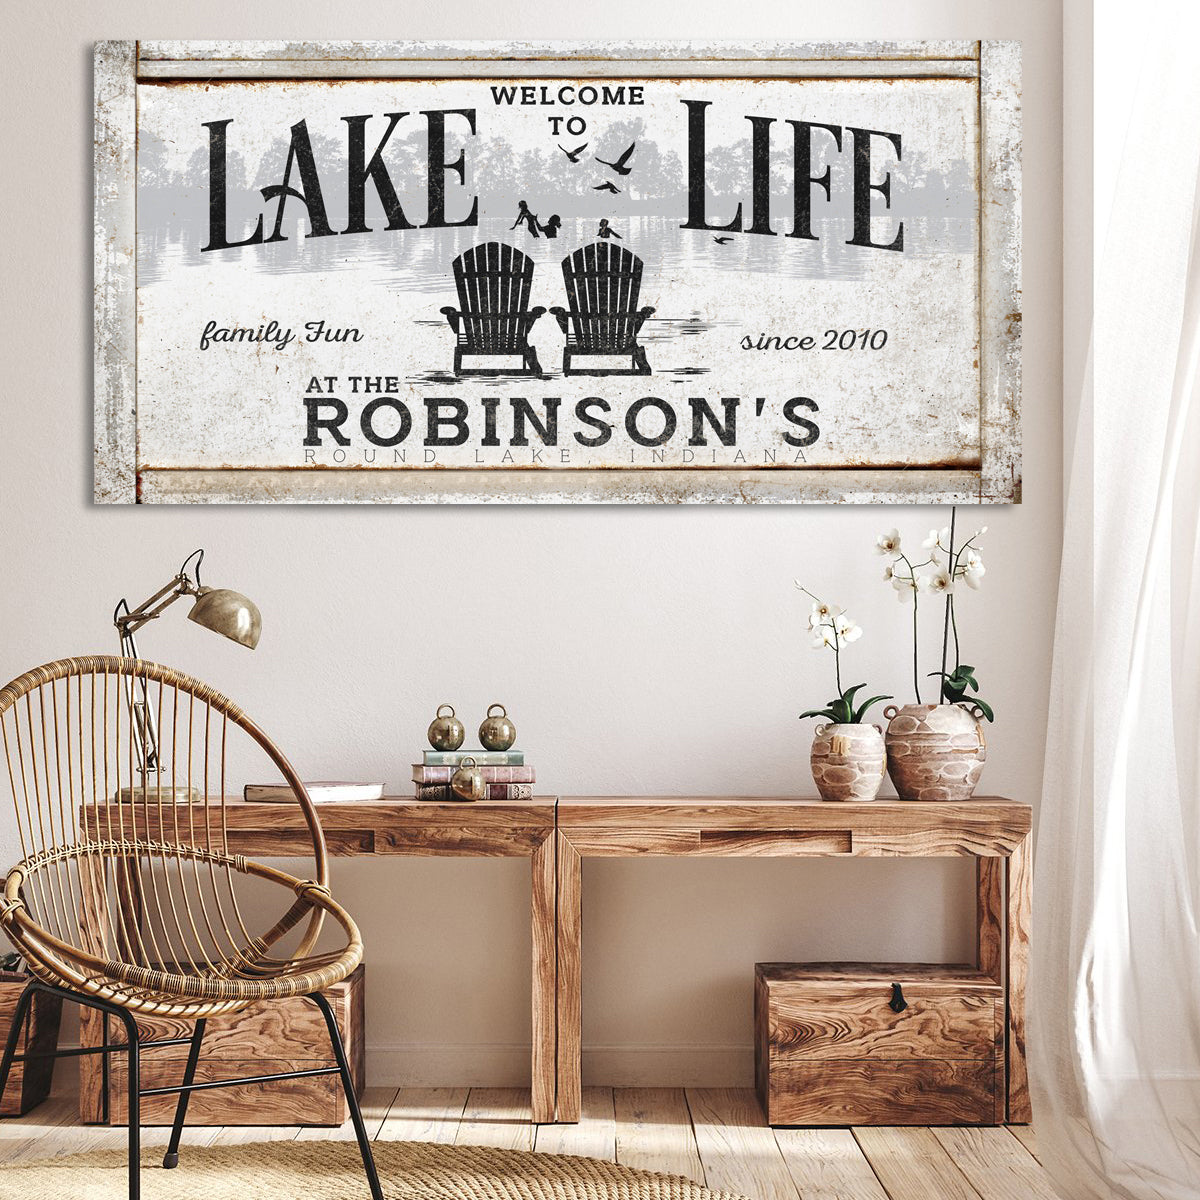 Can you hear? The lake is calling! Time to put up your personalized lake house sign on your very own front door to paradise.